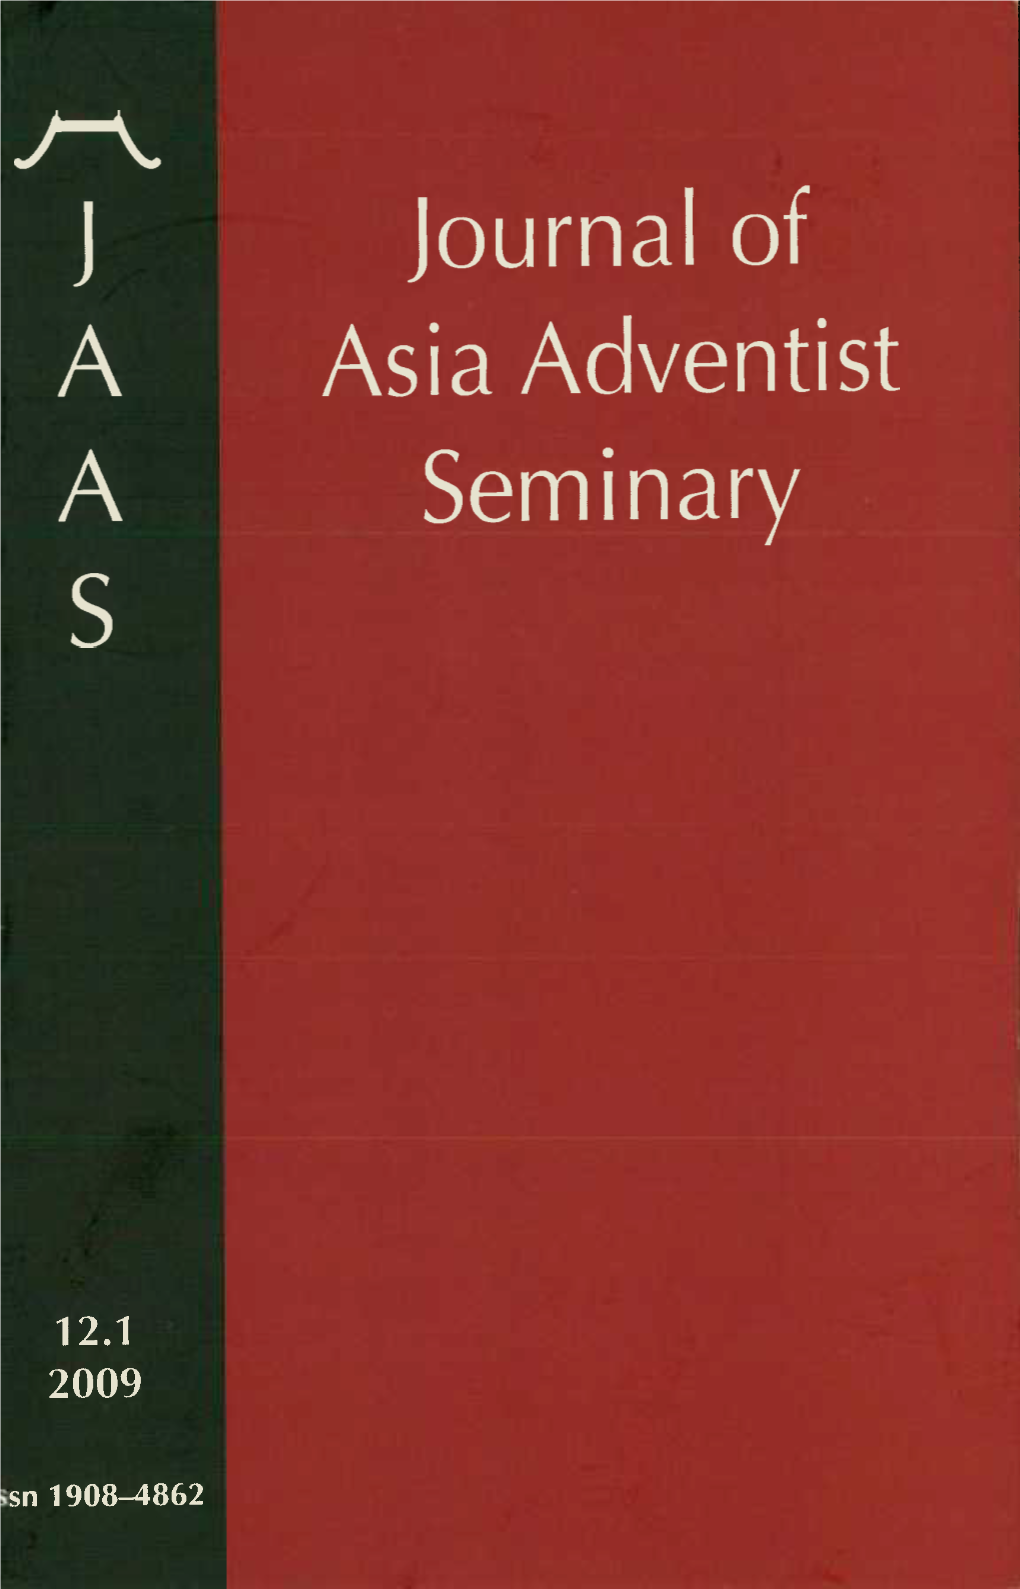 Journal of Asia Adventist Seminary for 2009